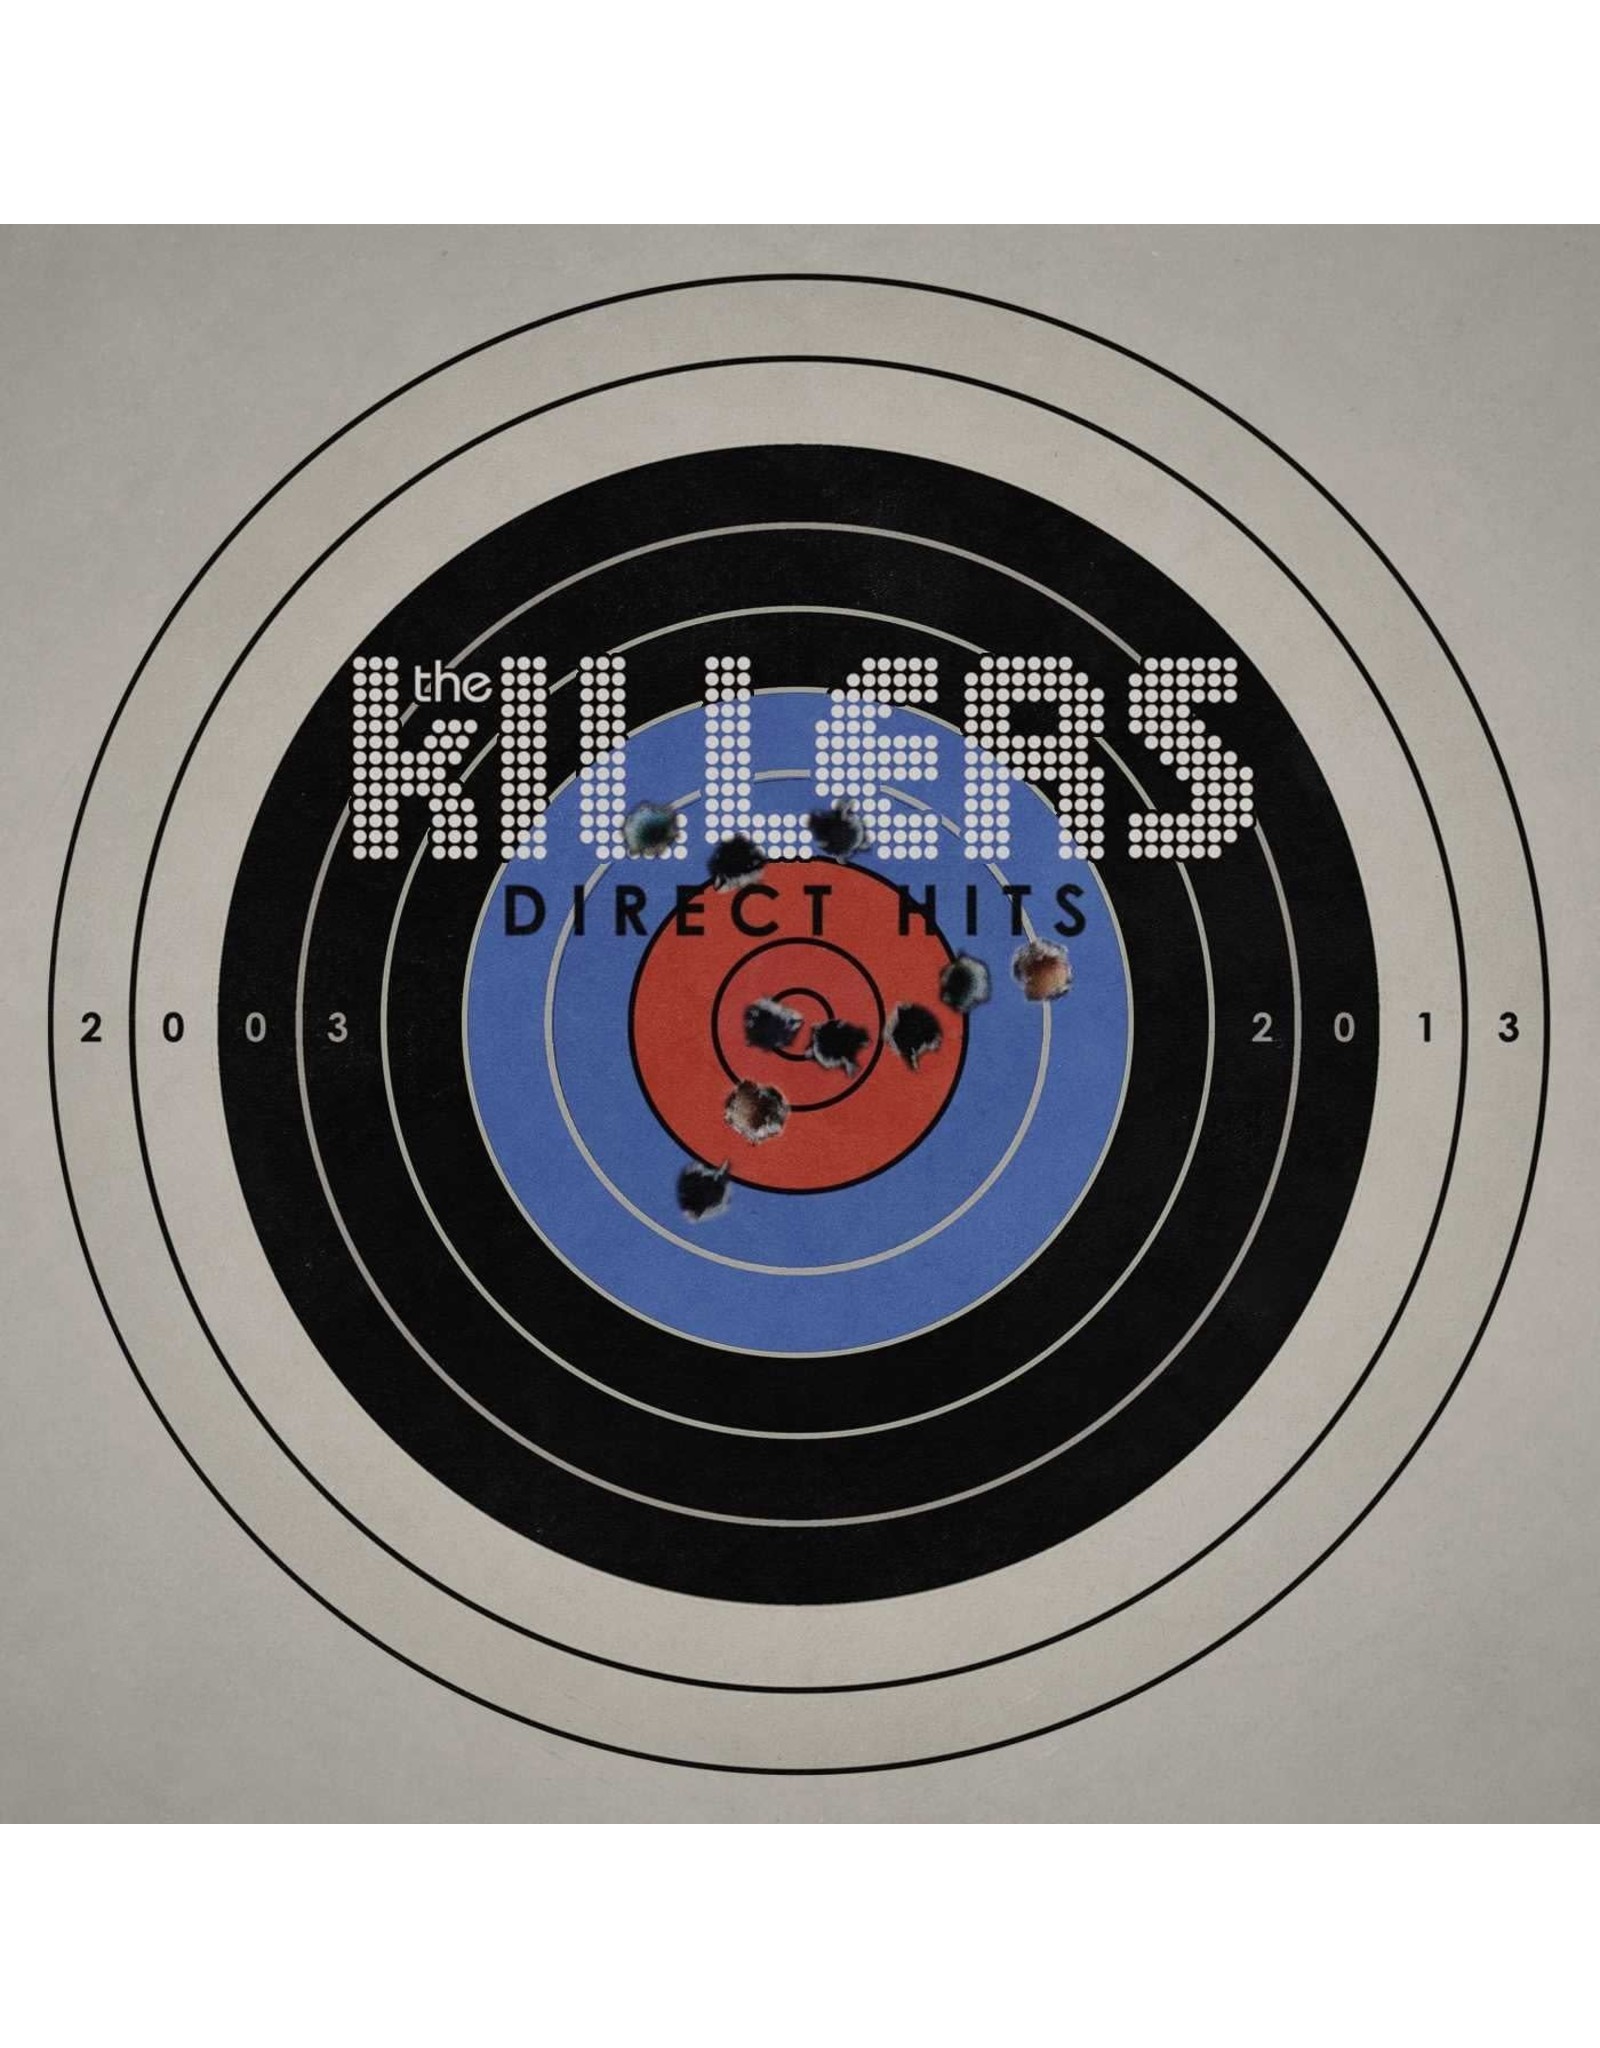 Killers - Direct Hits: The Best of The Killers (2003 - 2013)